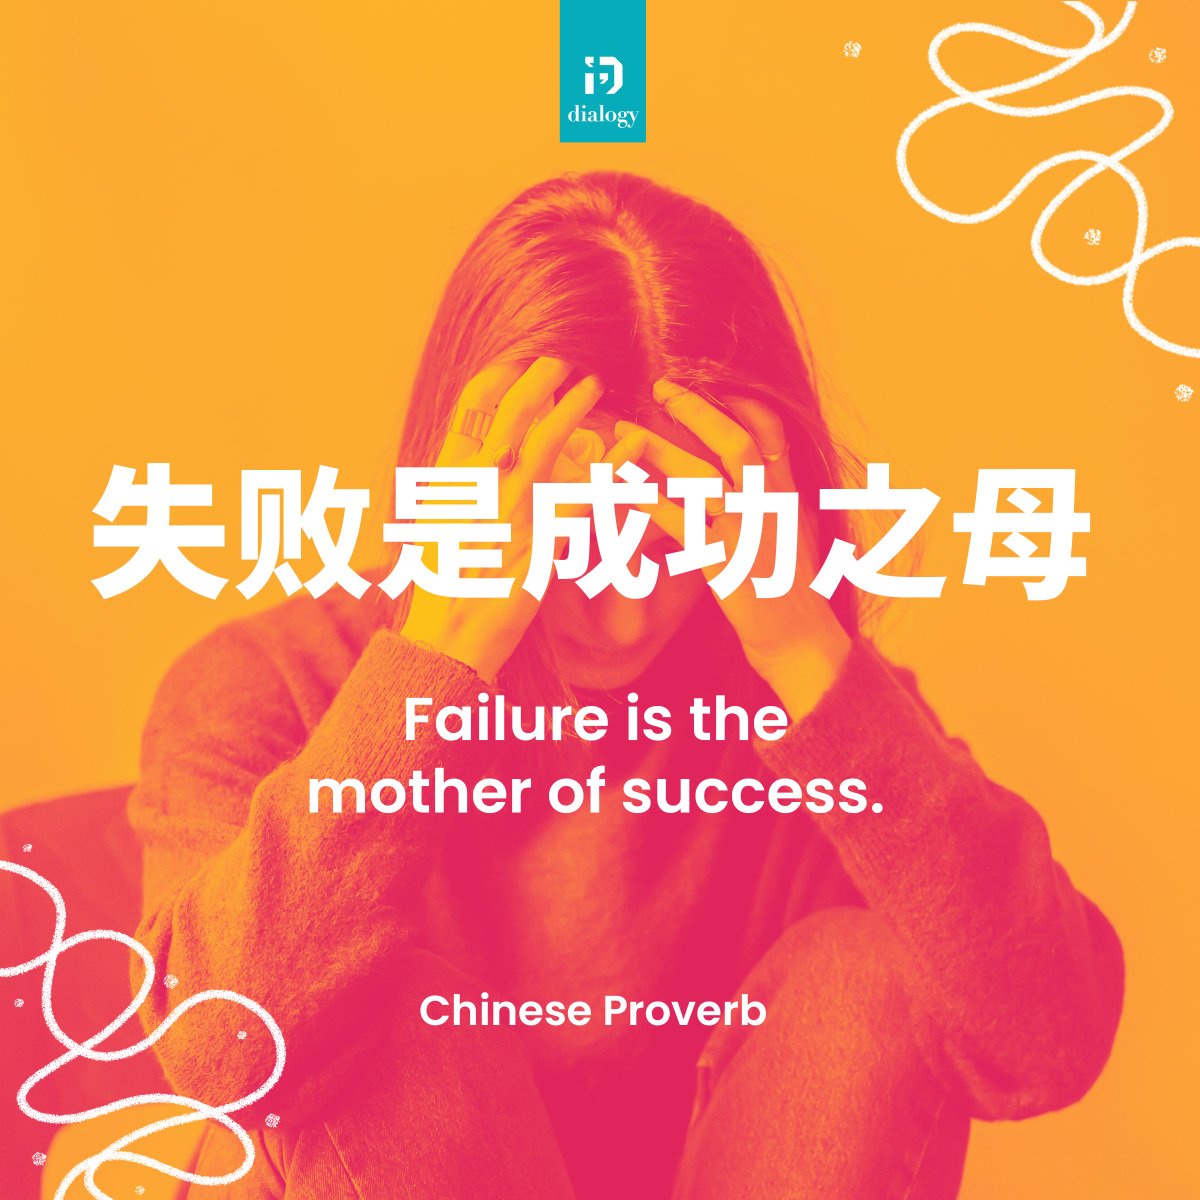 'Failure is the mother of success.'

Chinese Proverb

✨ Be part of a community that celebrates diversity and inclusion! Follow us for inspiring quotes about education and pedagogy that challenge the status quo. 

#DiversityAndInclusion #EducationForAll #ChallengingTheStatusQuo